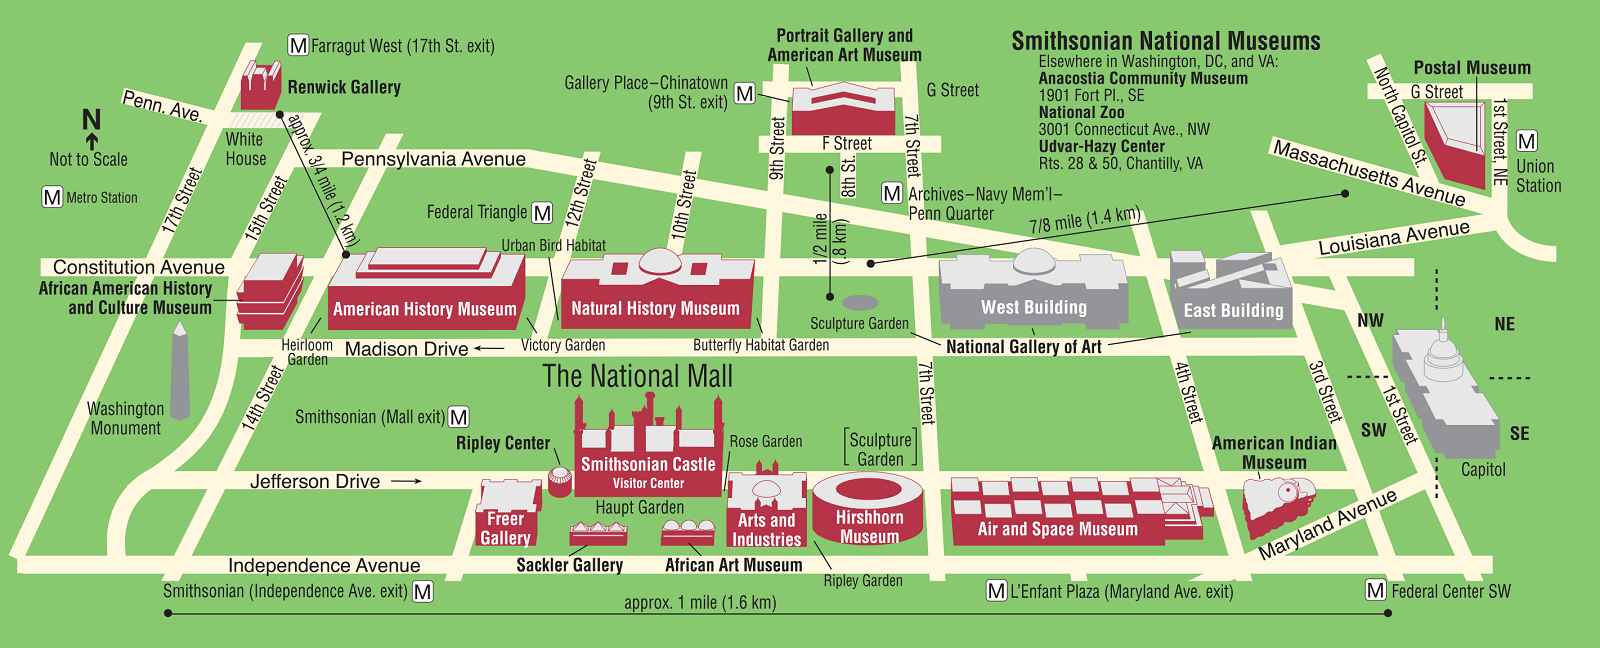 Smithsonian Mall Map 2018 Med 